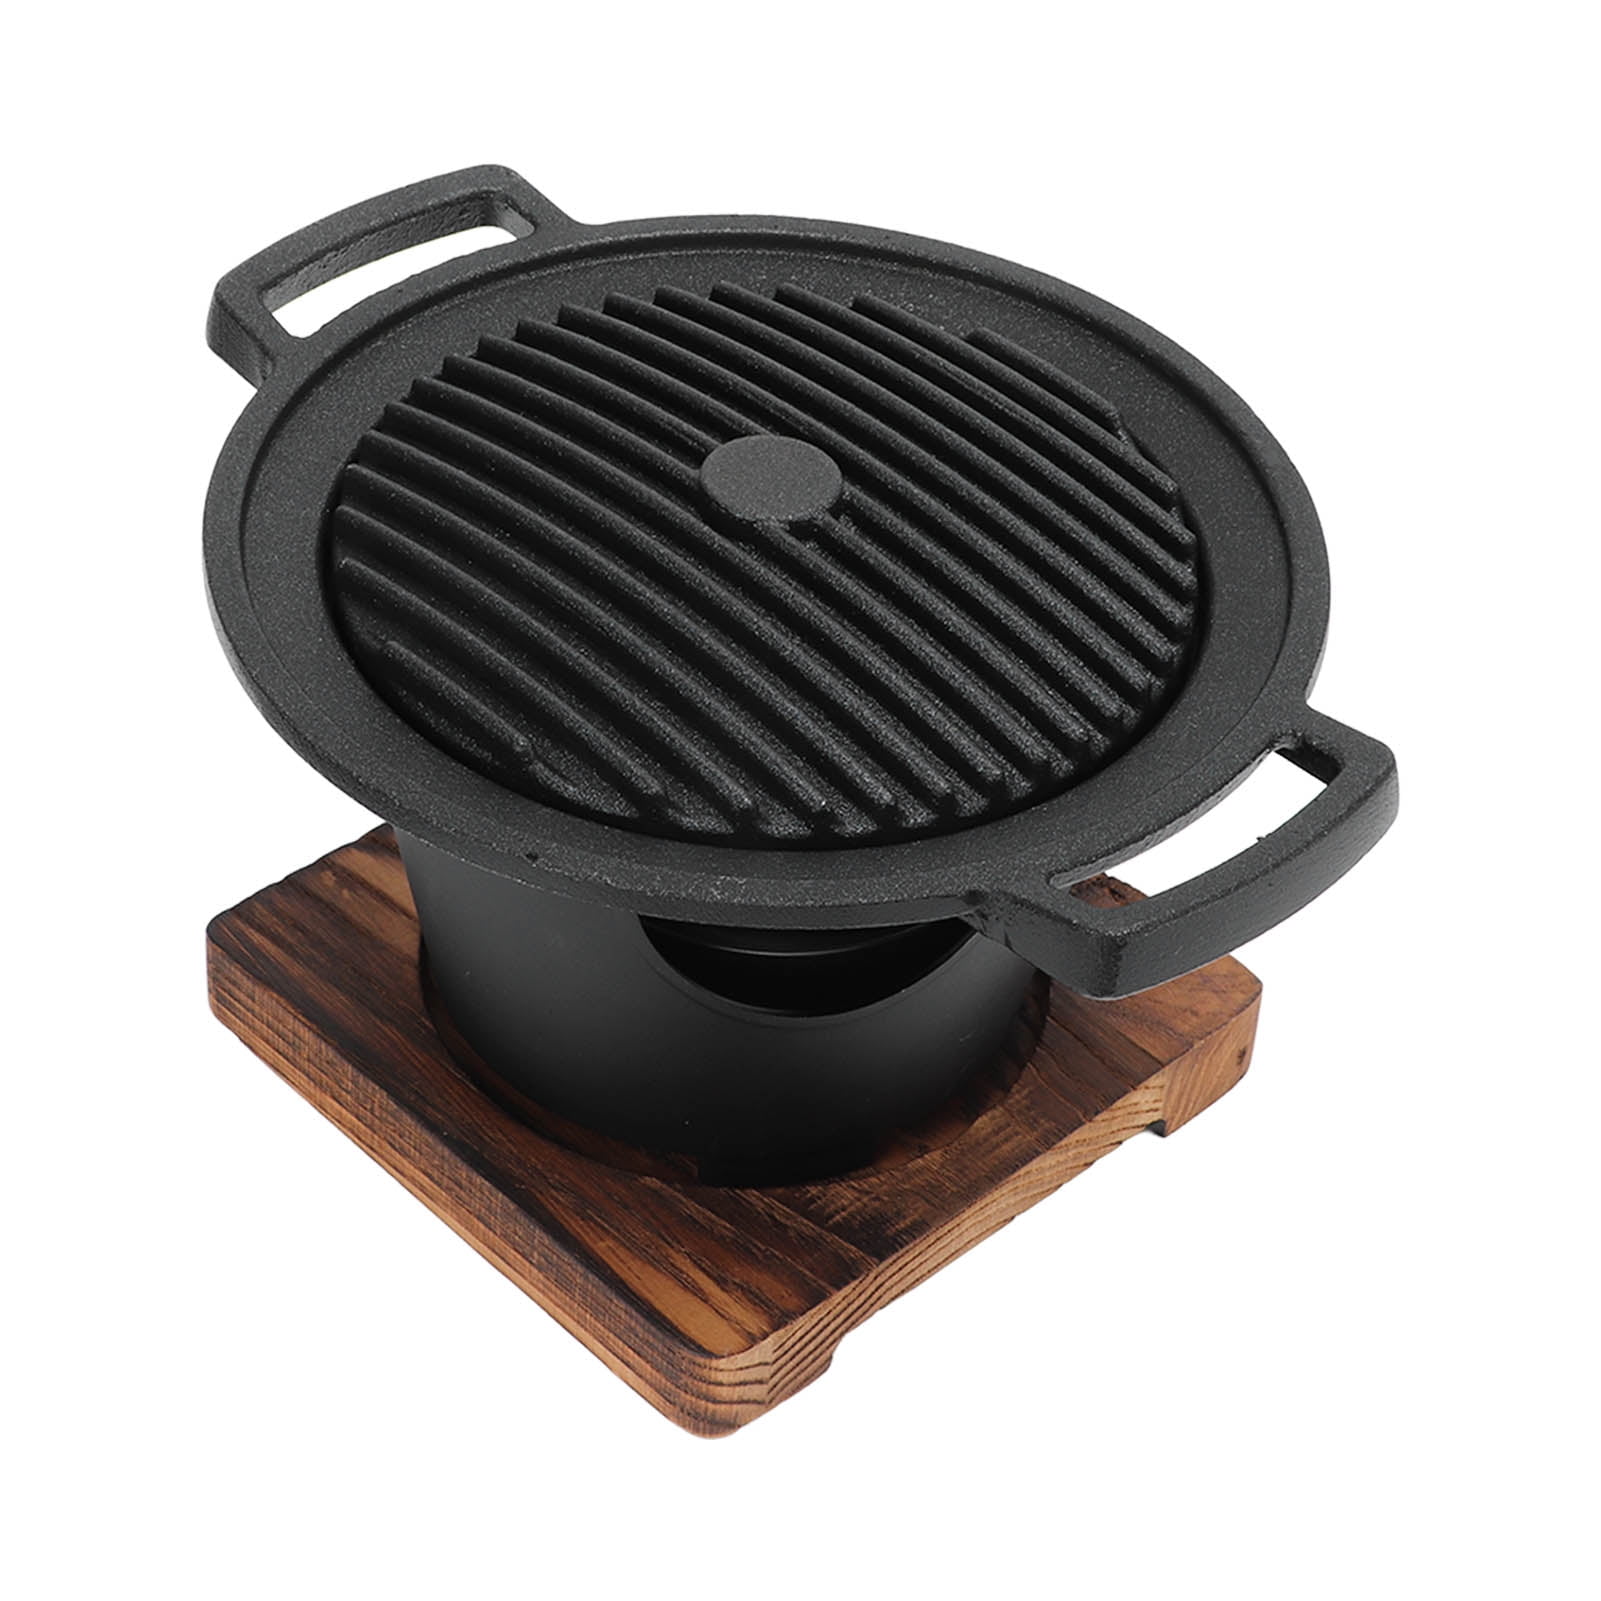 Zaqw Korean Barbecue Grill Small One Person Mini Bbq Grill Japanese Barbecue Pan For Home,Home Barbecue Grills,Indoor Charcoal Grill - Walmart.com